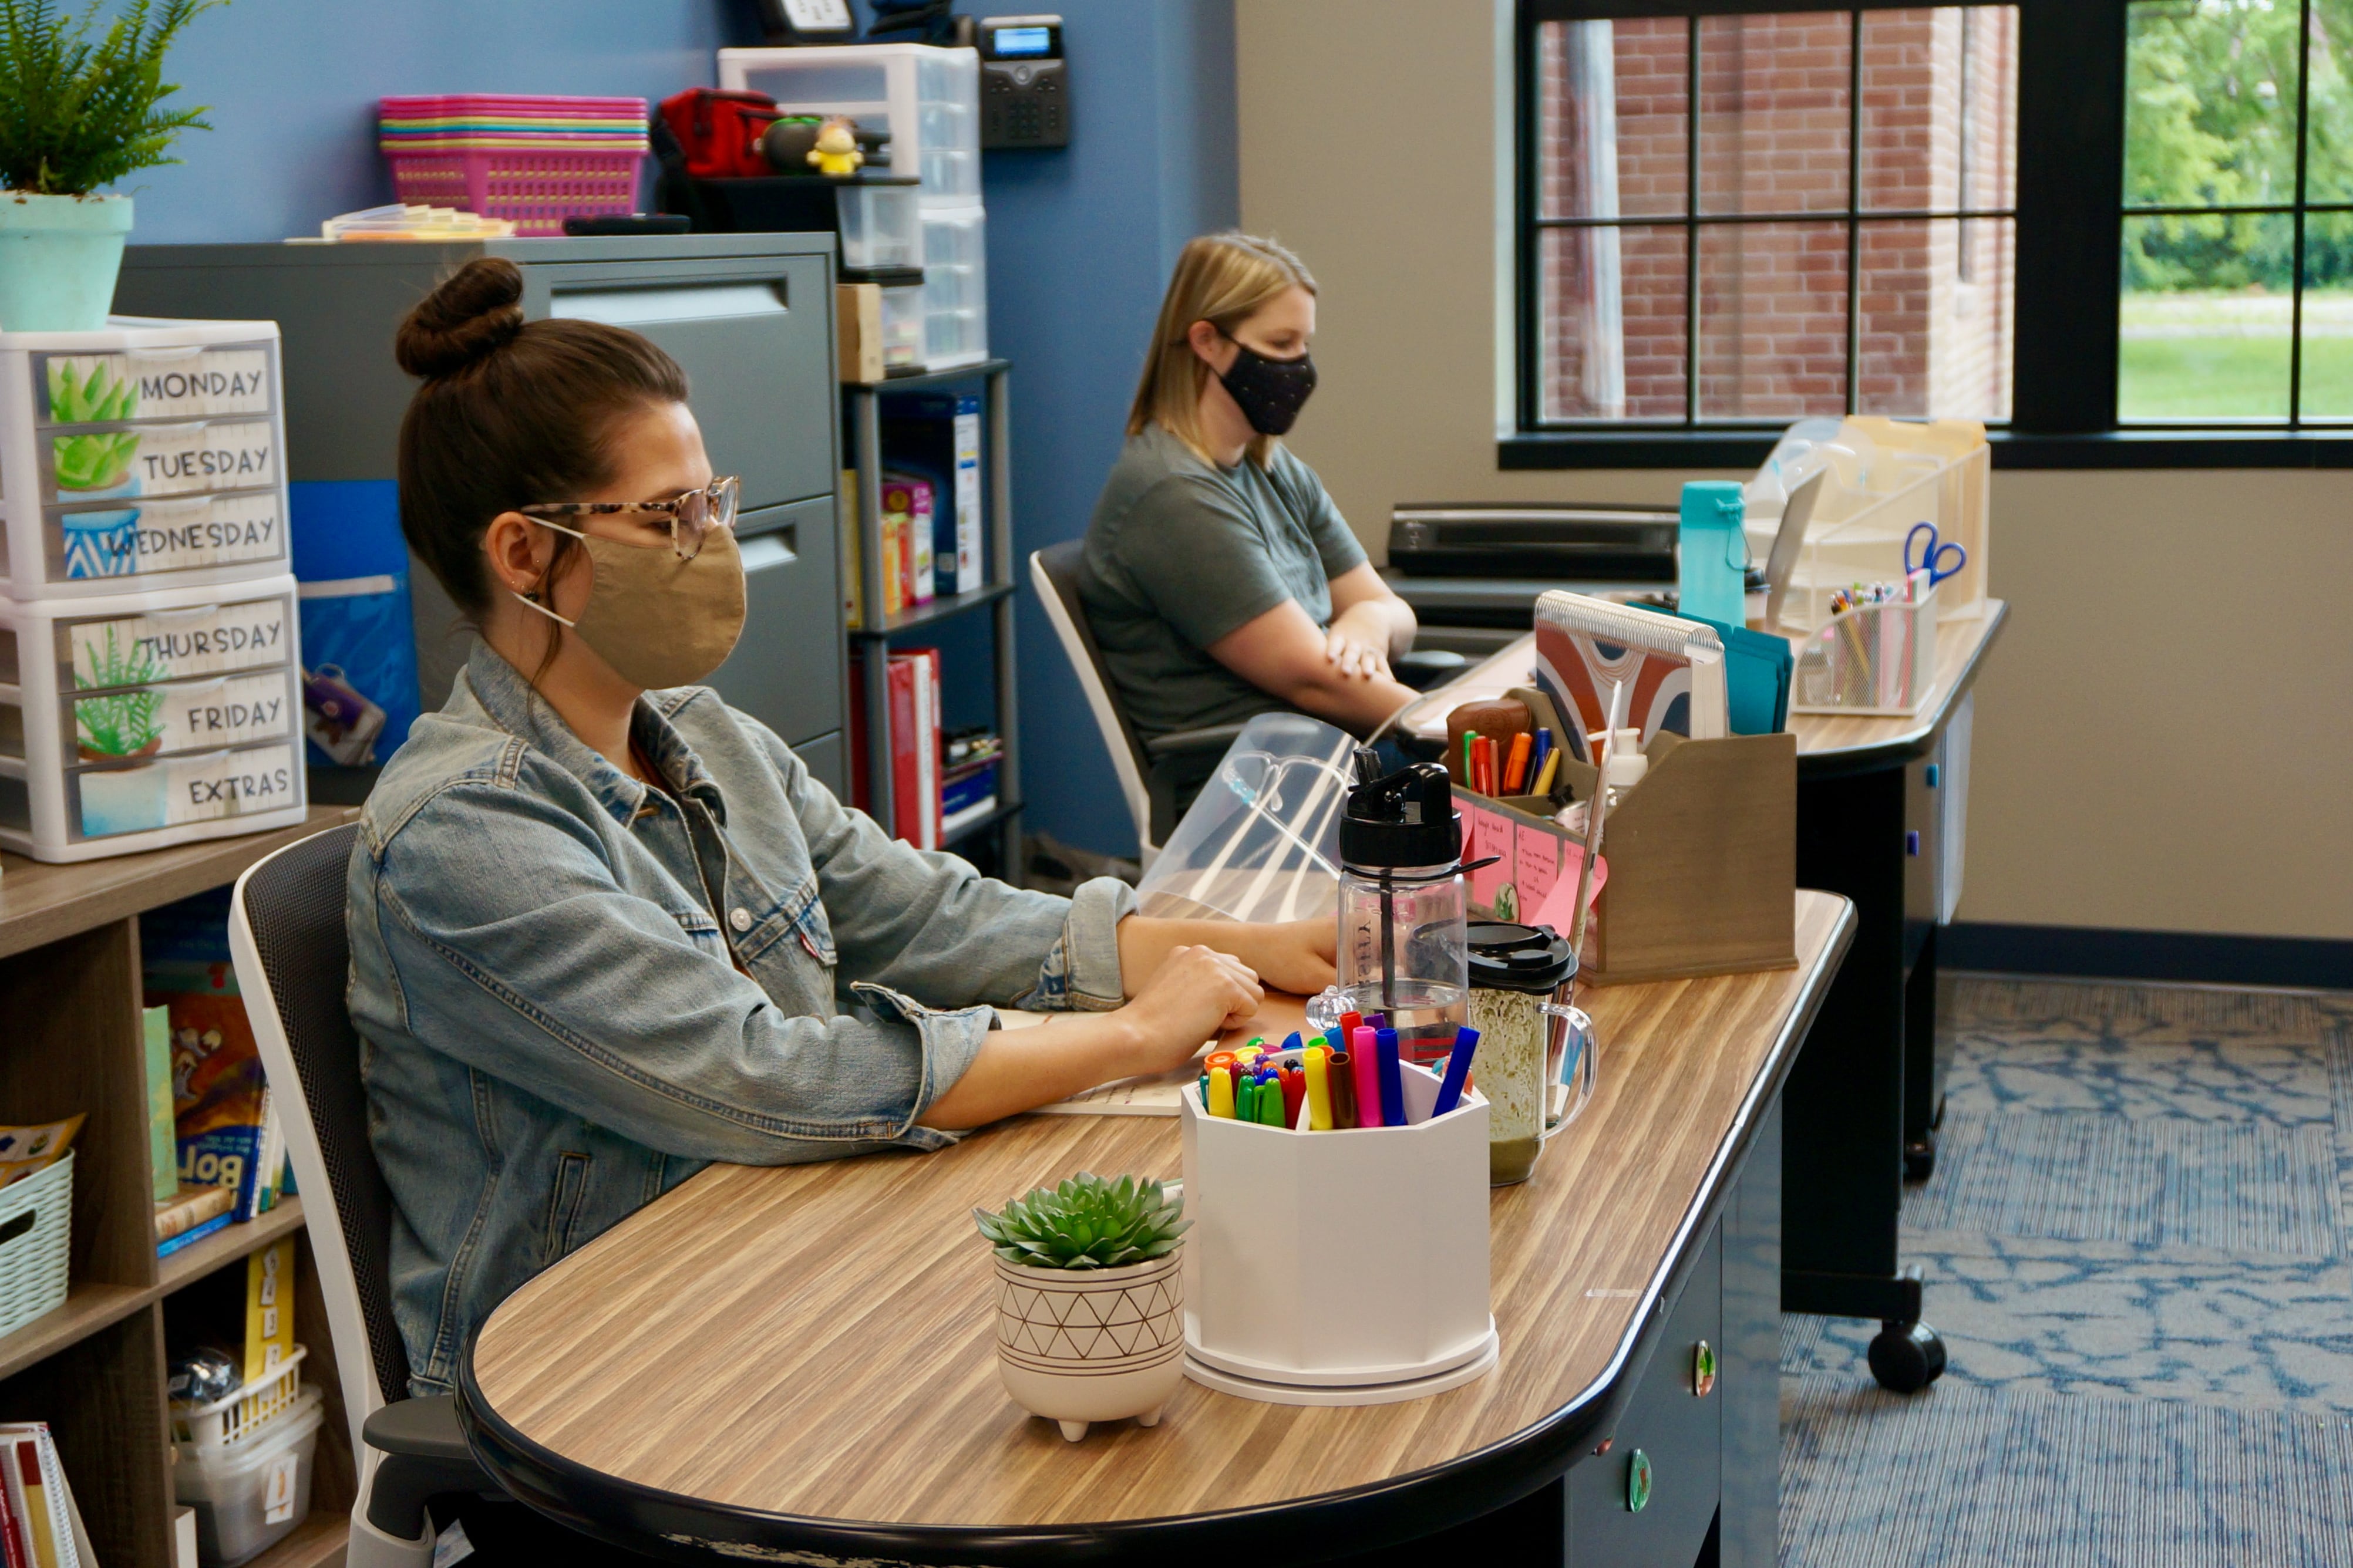 Two teachers sit in a classroom at laptops with masks on.